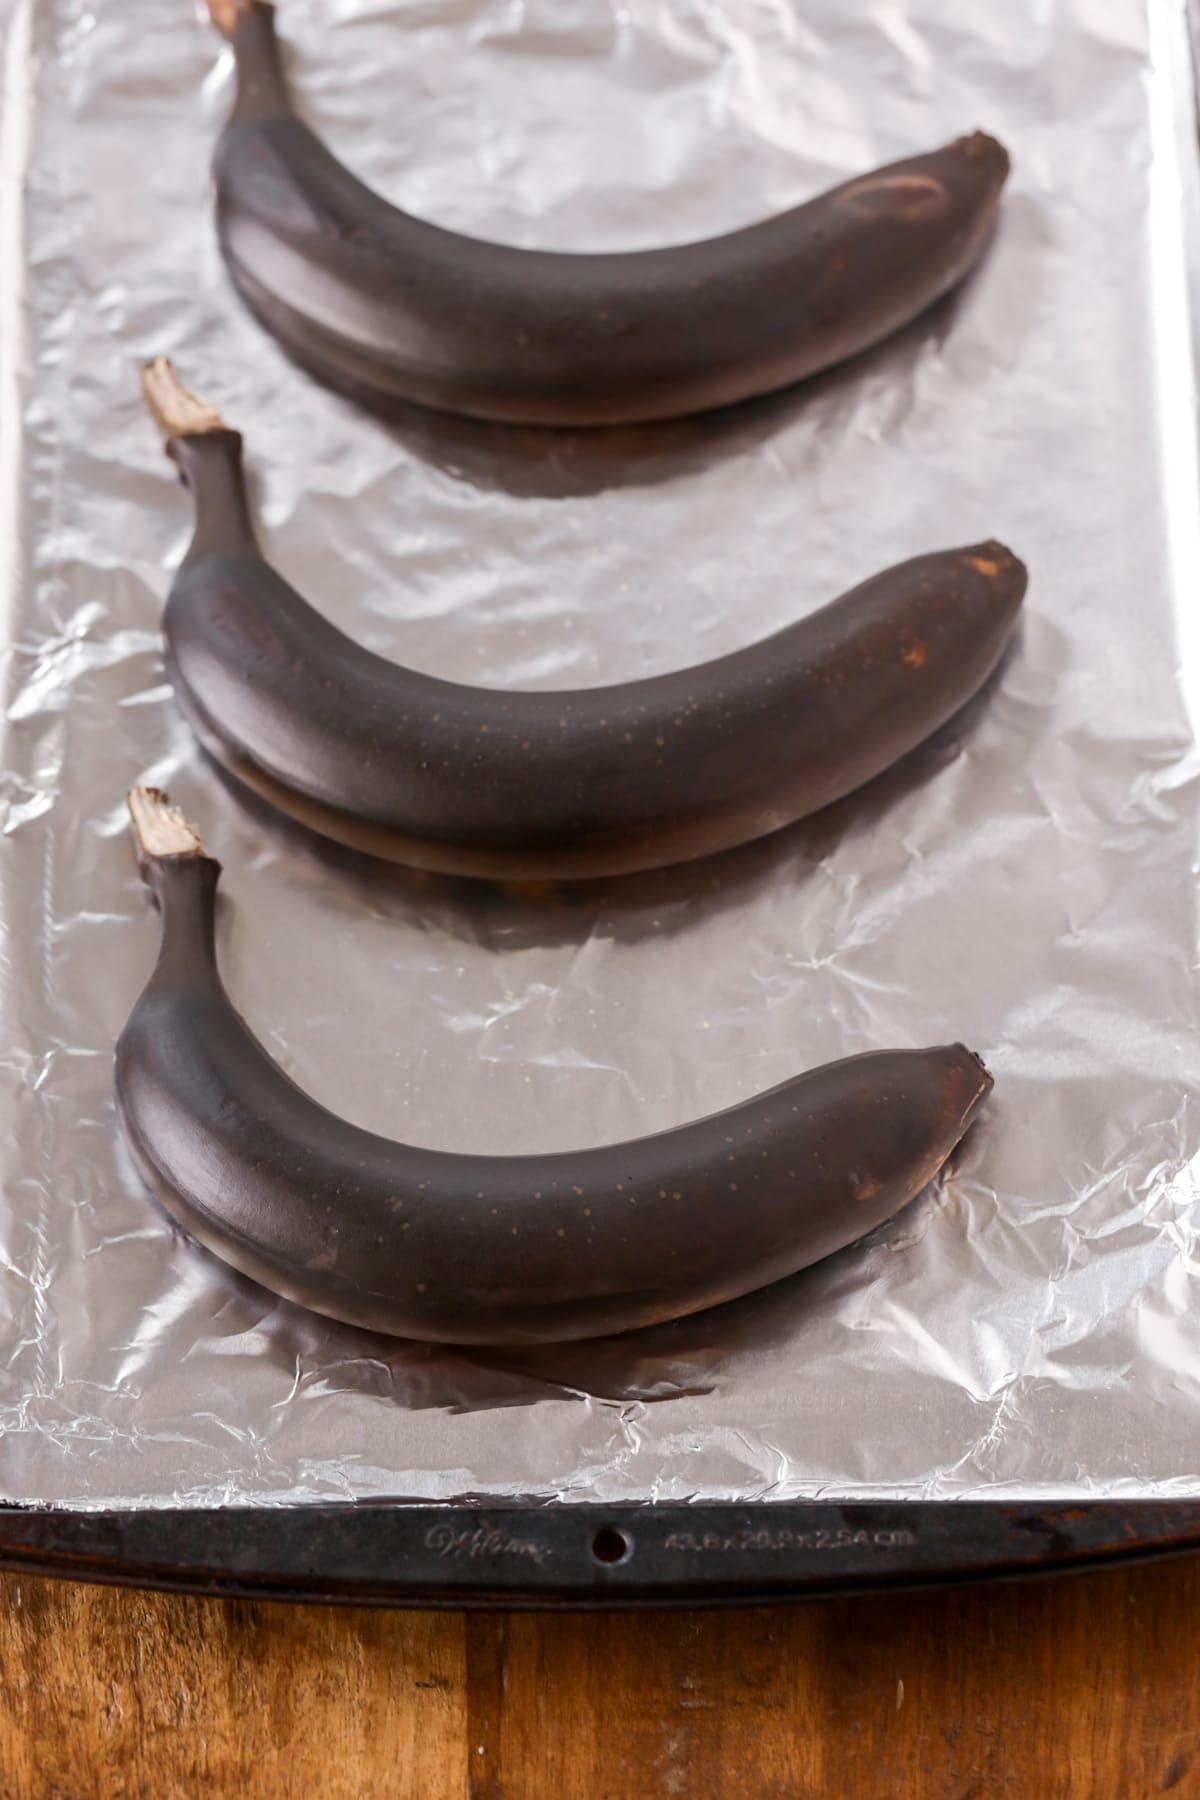 Very ripe bananas on a lined baking sheet.